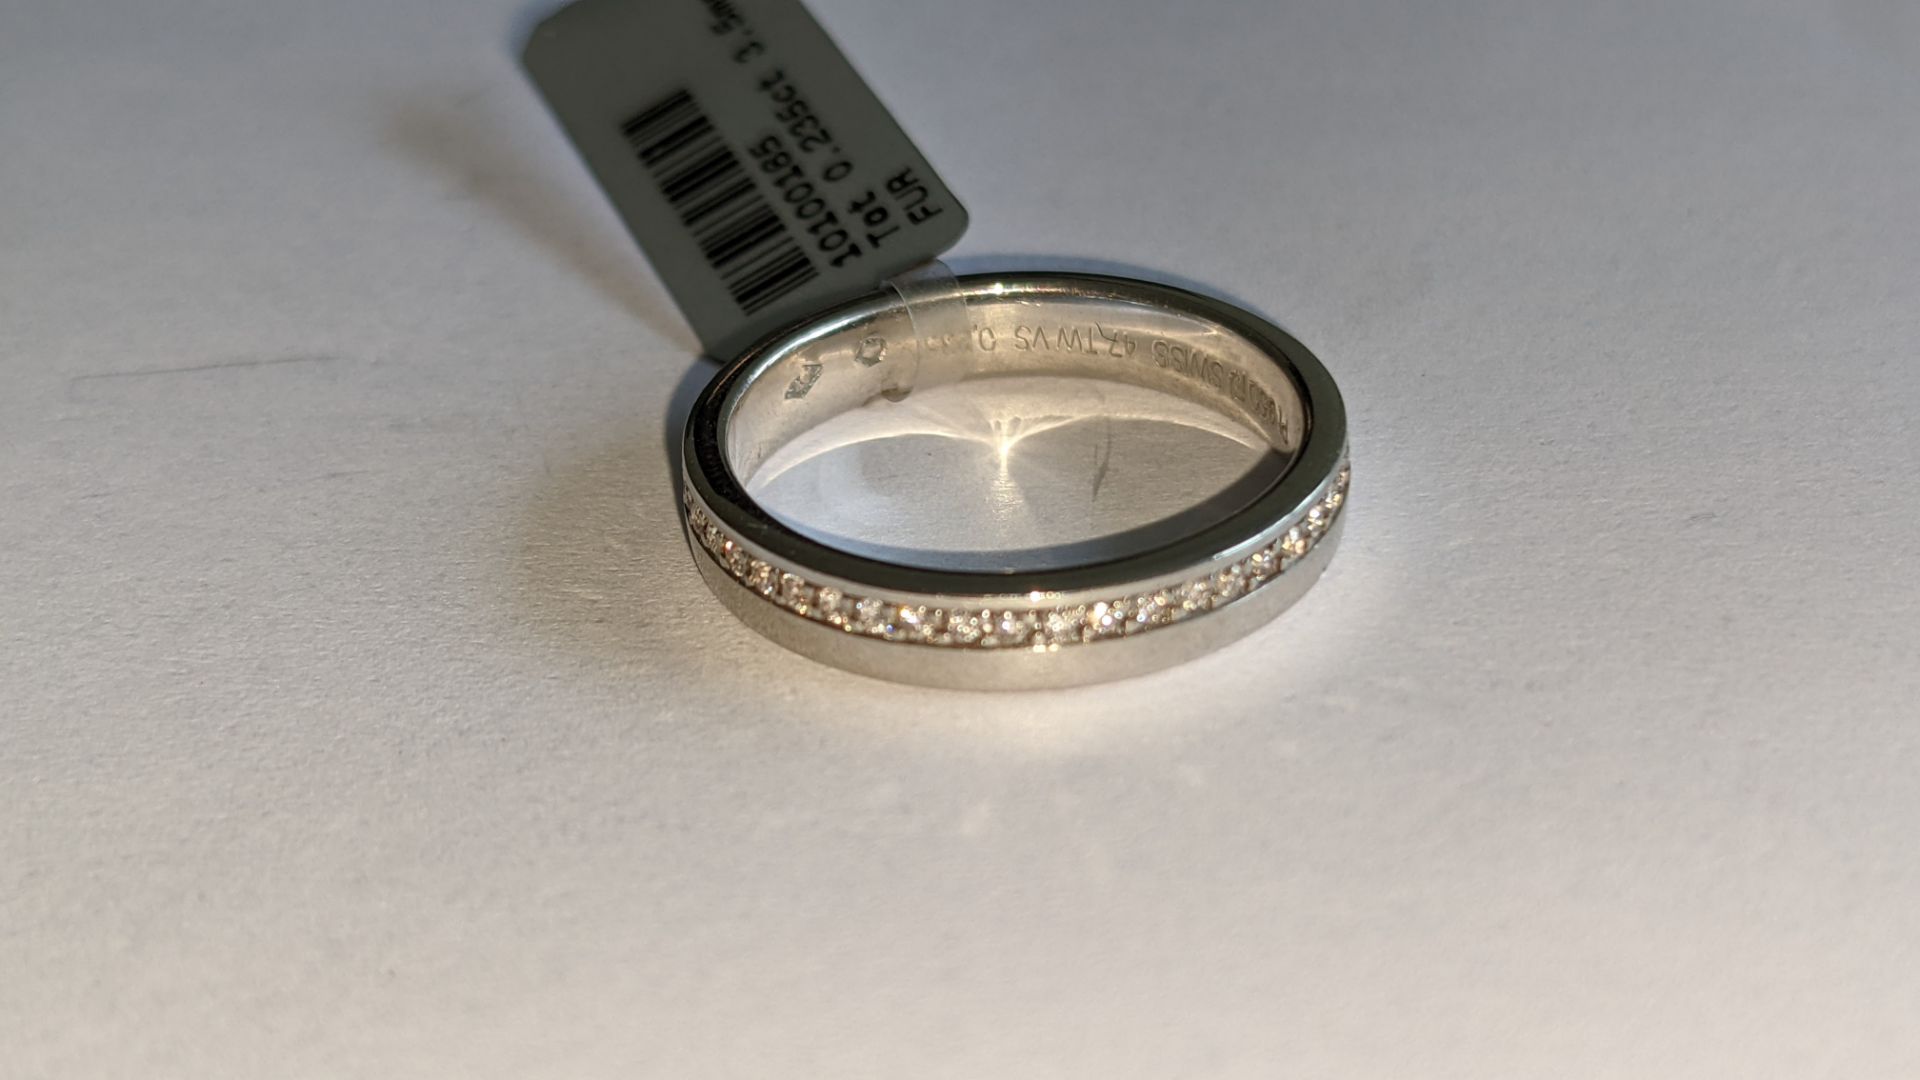 Platinum 950 ring with diamonds weighing total of 0.235ct. Ring 3.5mm wide. Diamonds surround the en - Image 7 of 15